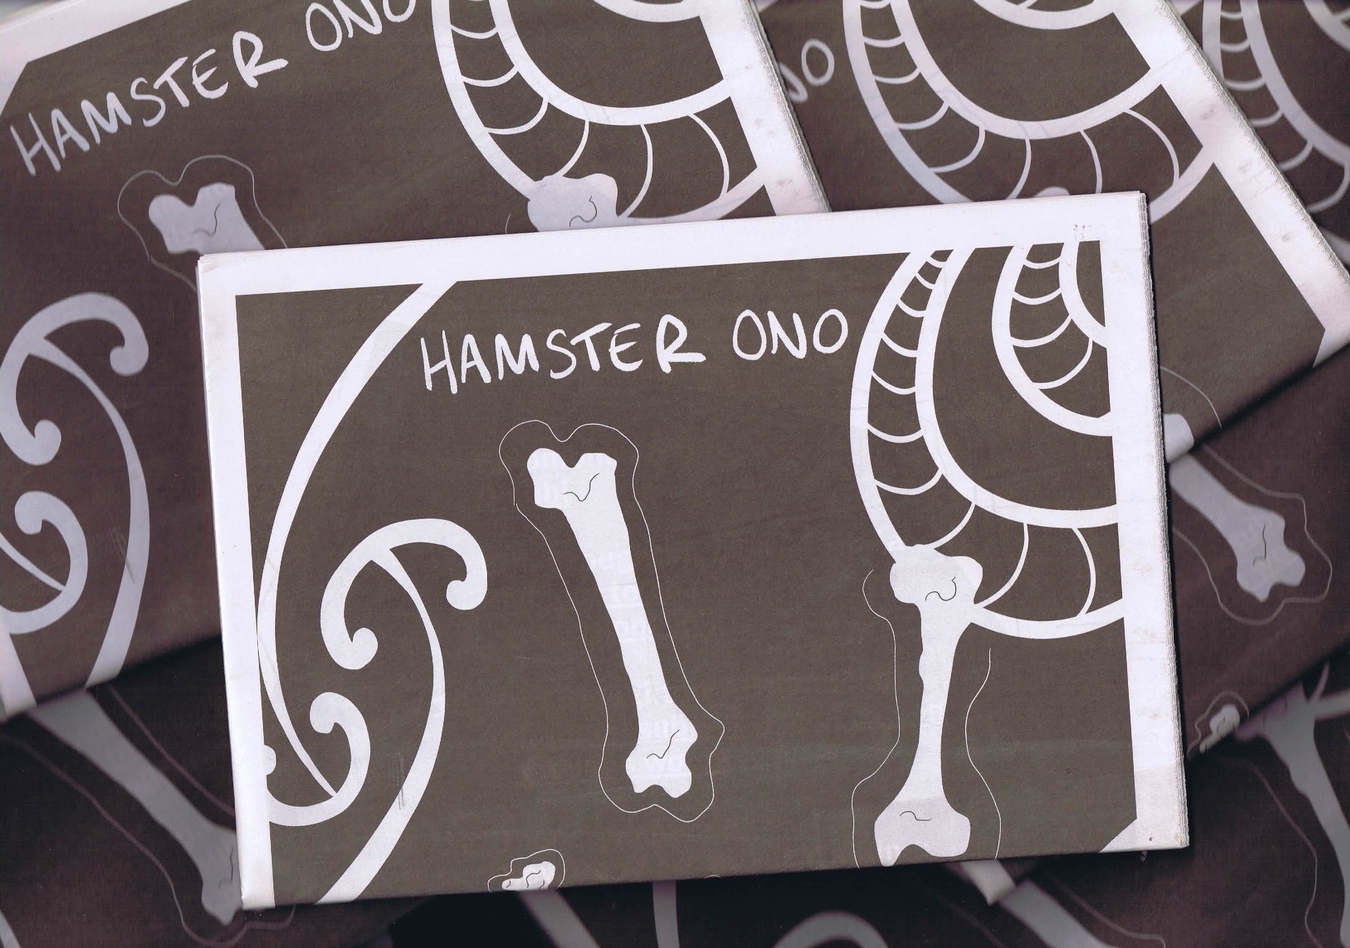 HAMSTER Issue Ono, Cover Design by Jess Thompson-Carr.